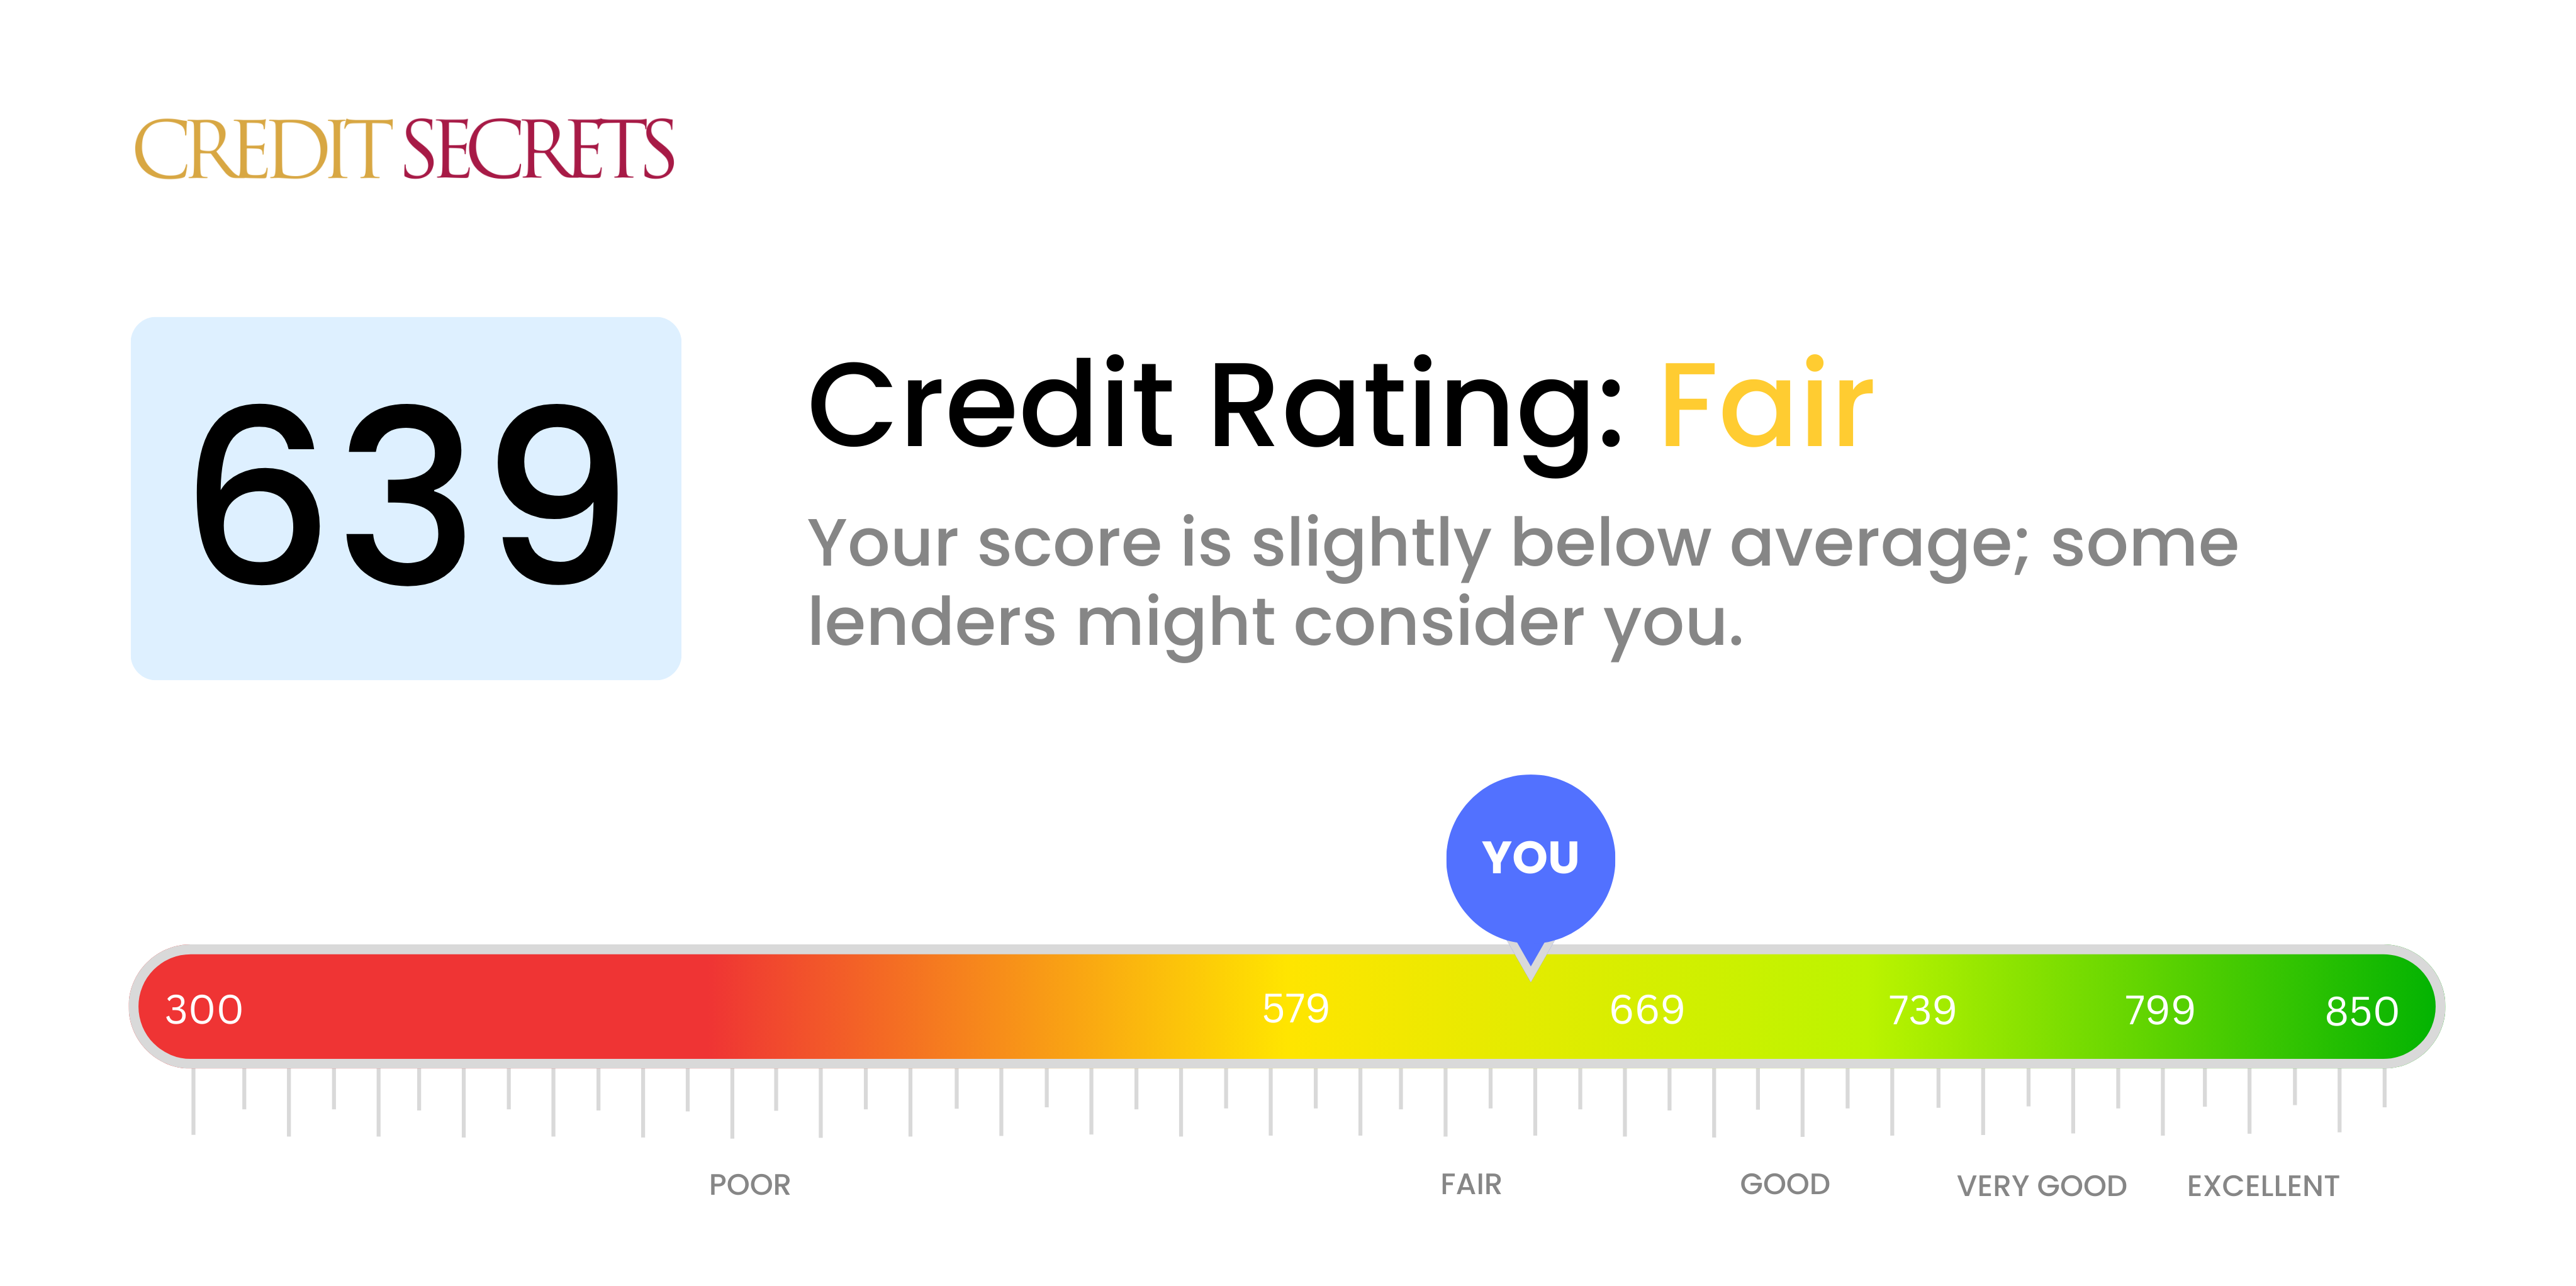 Is 639 a good credit score?